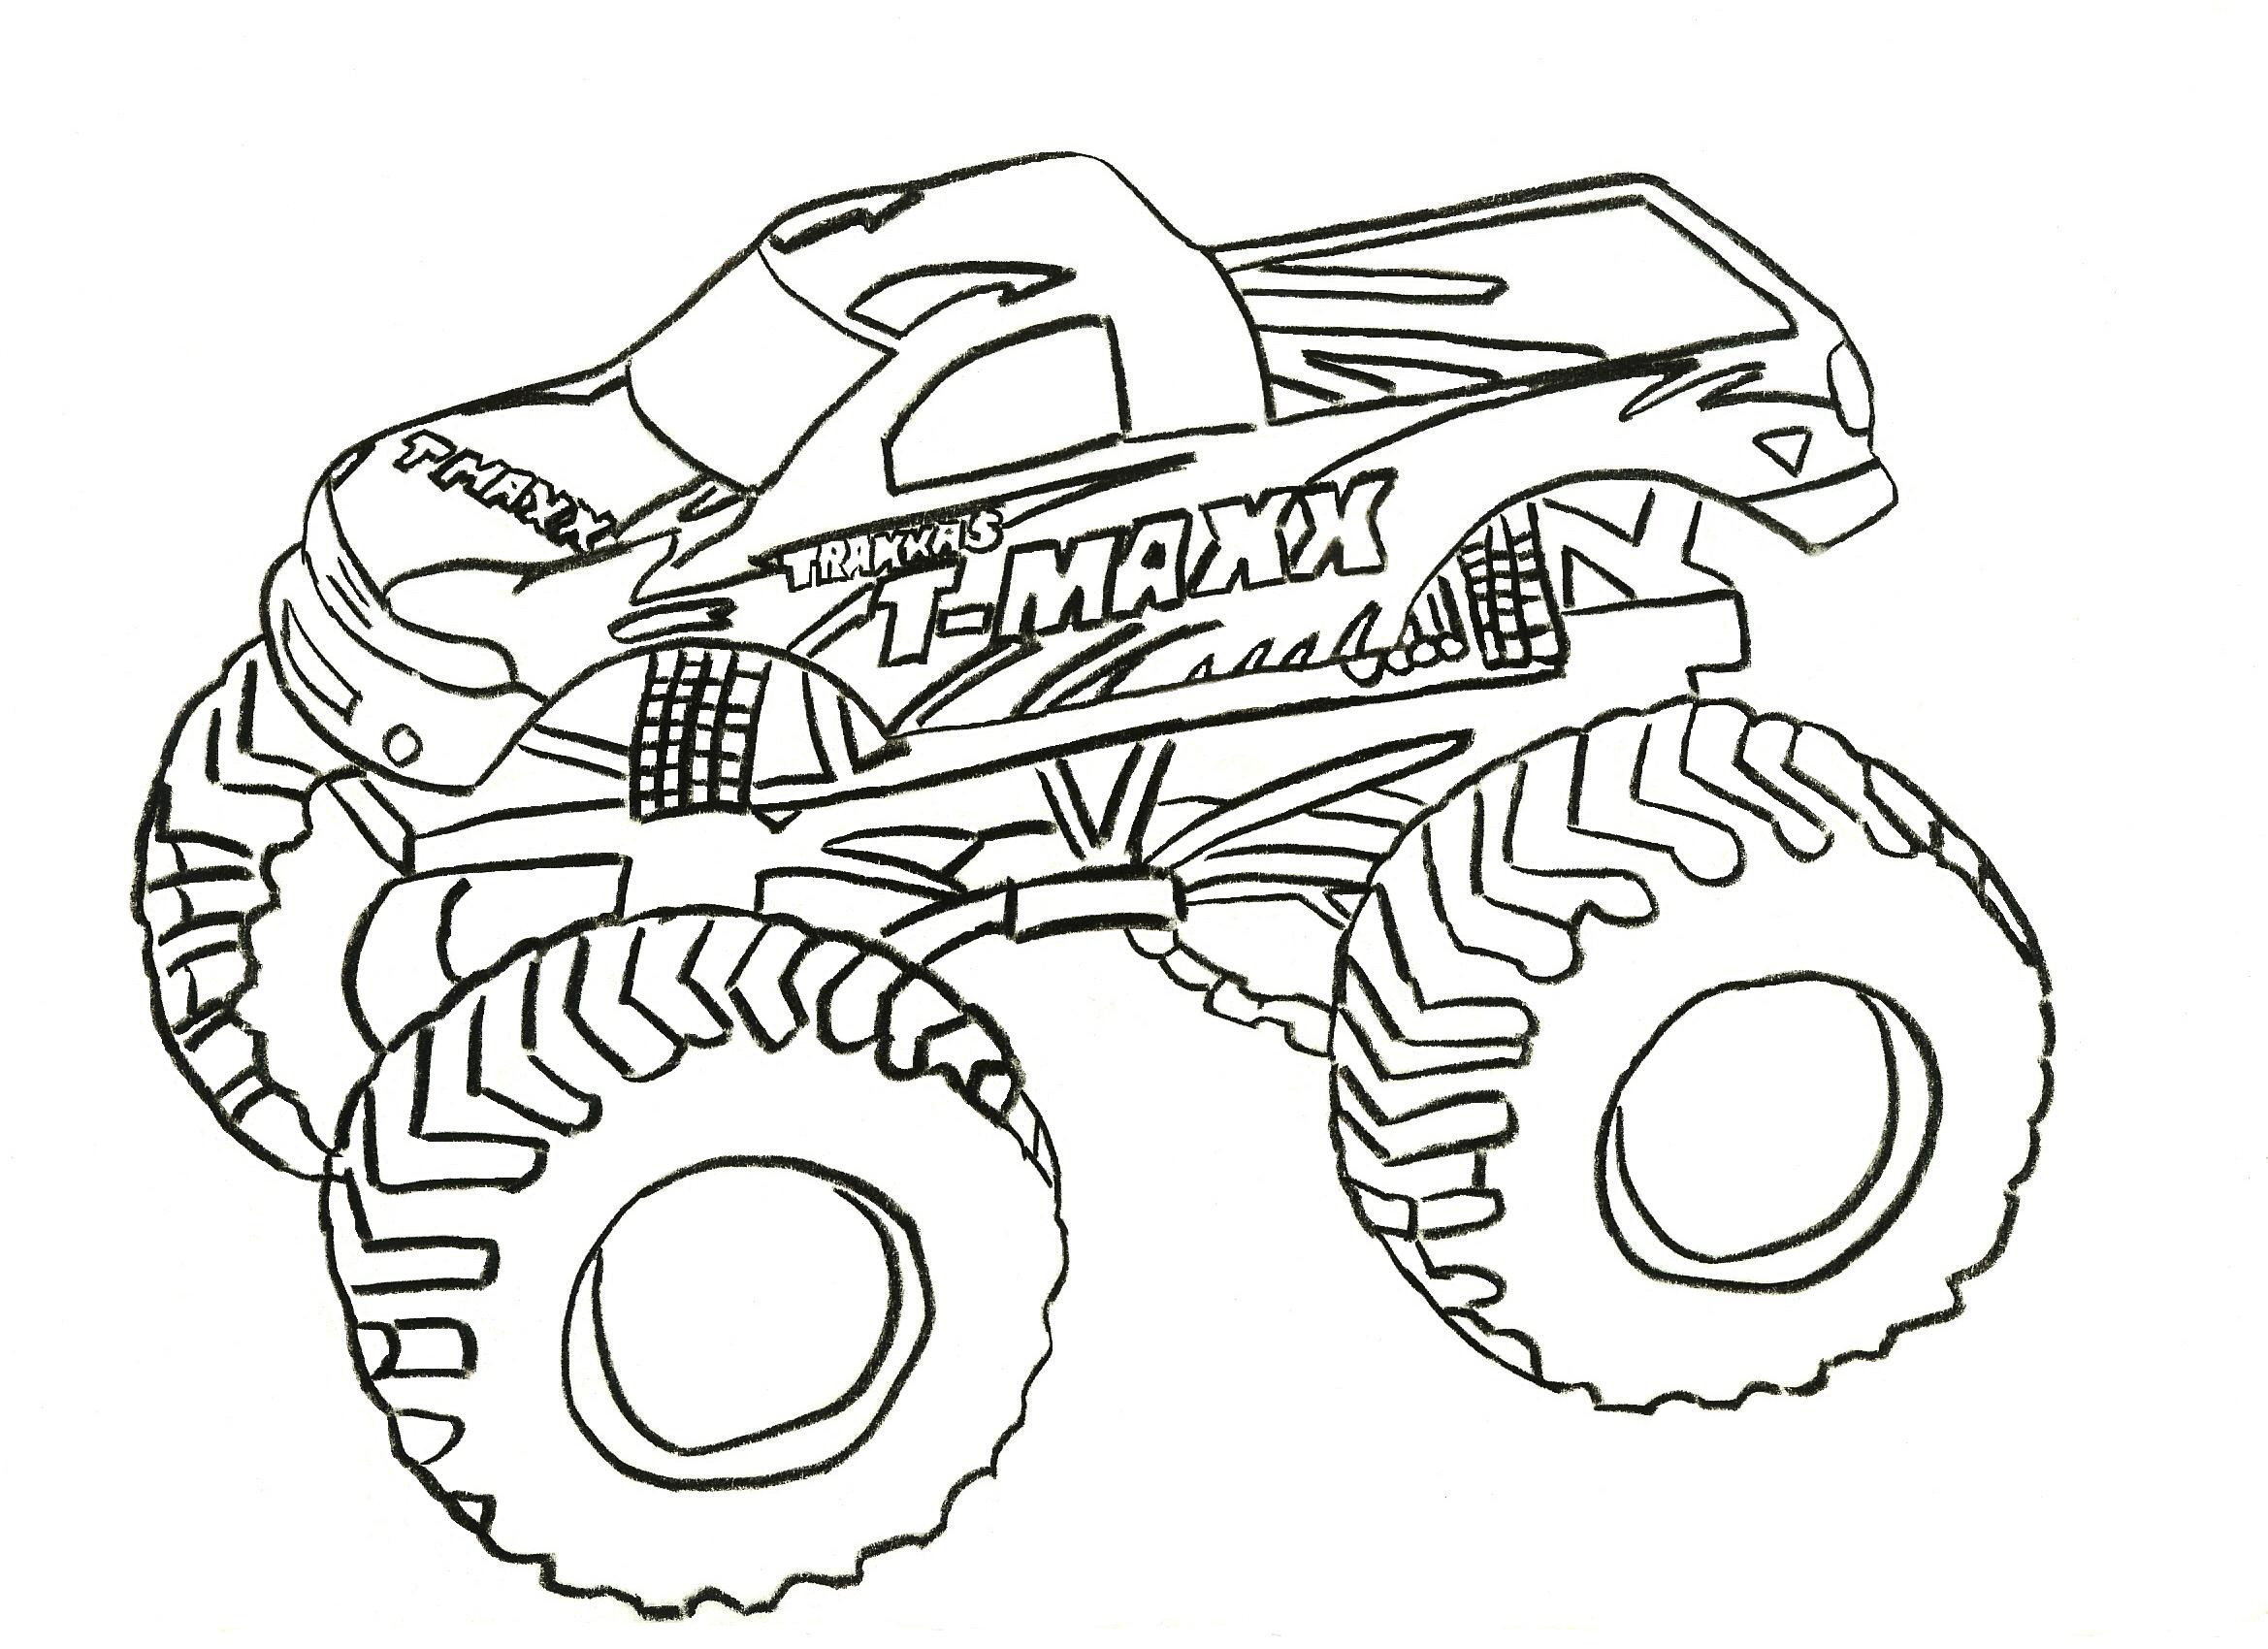 Free Printable Monster Truck Coloring Pages
 Free Printable Monster Truck Coloring Pages For Kids